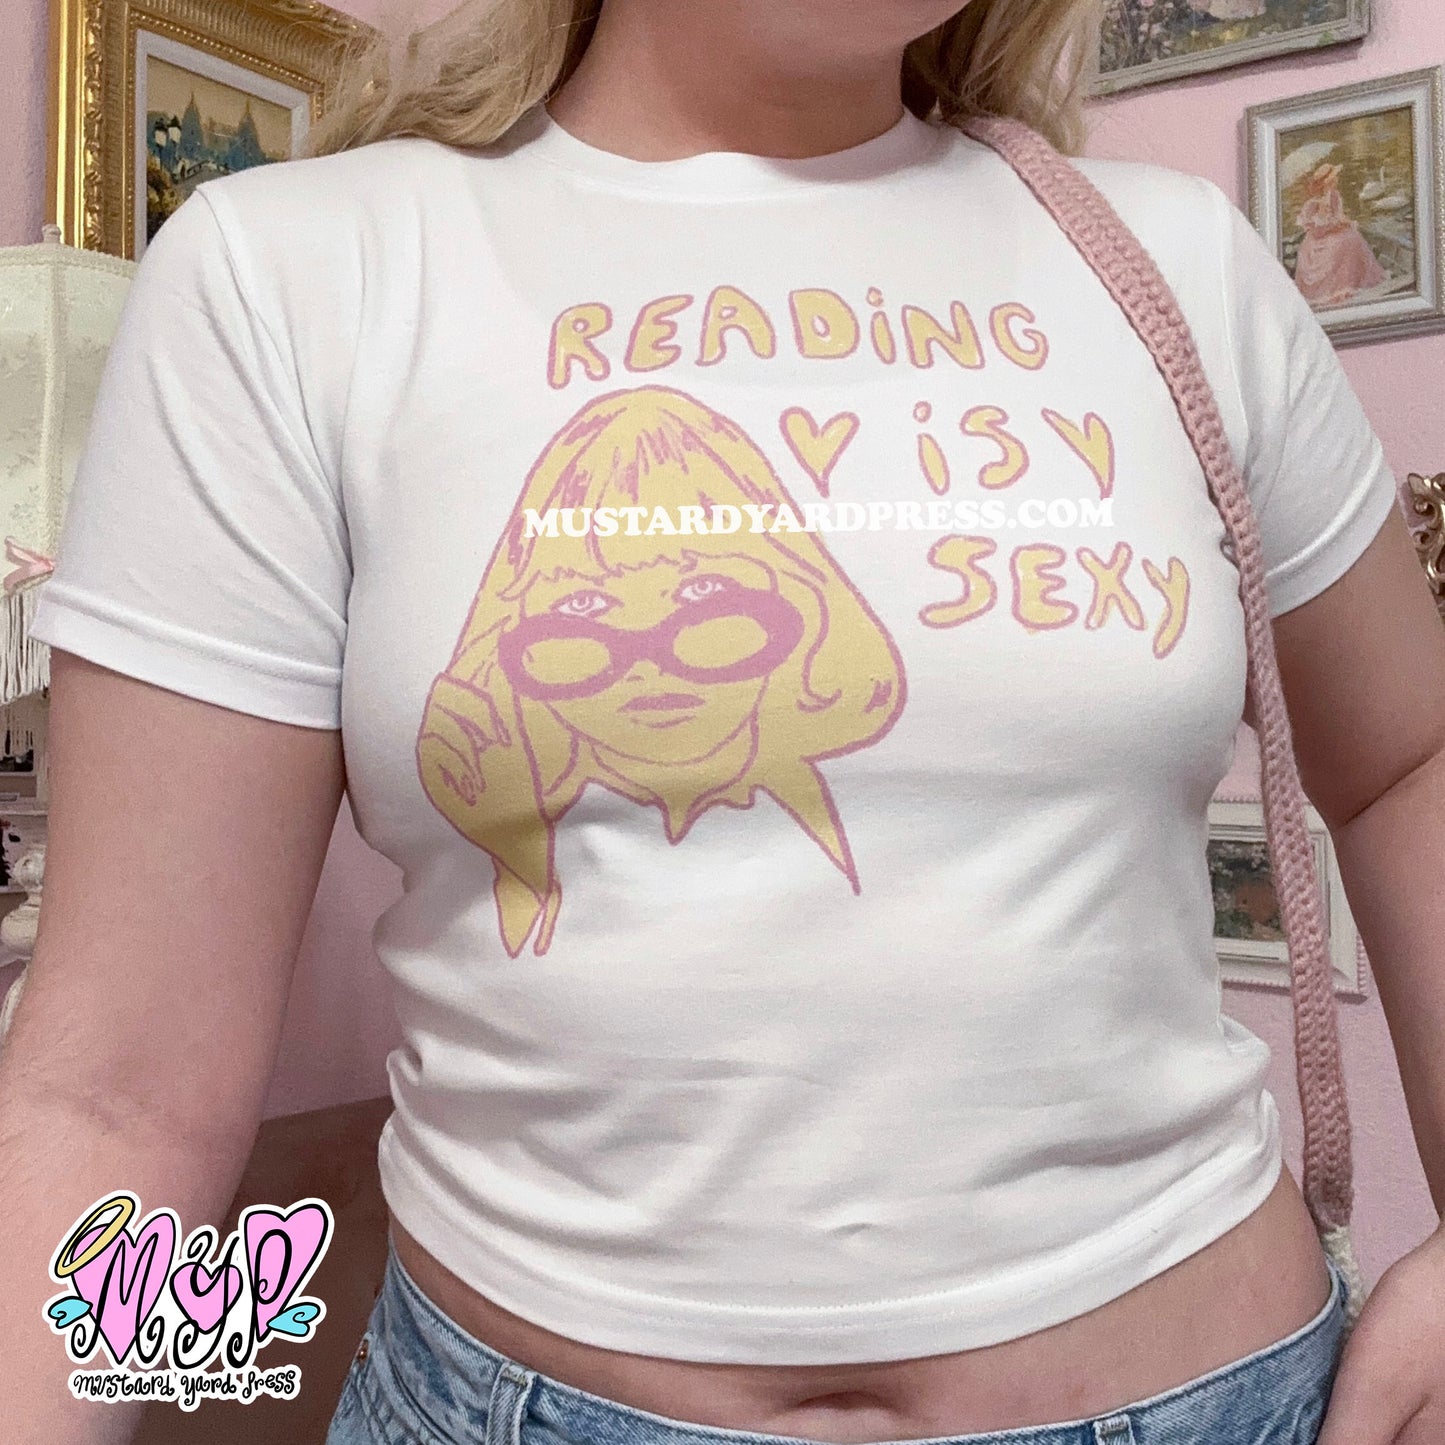 reading is sexy baby tee